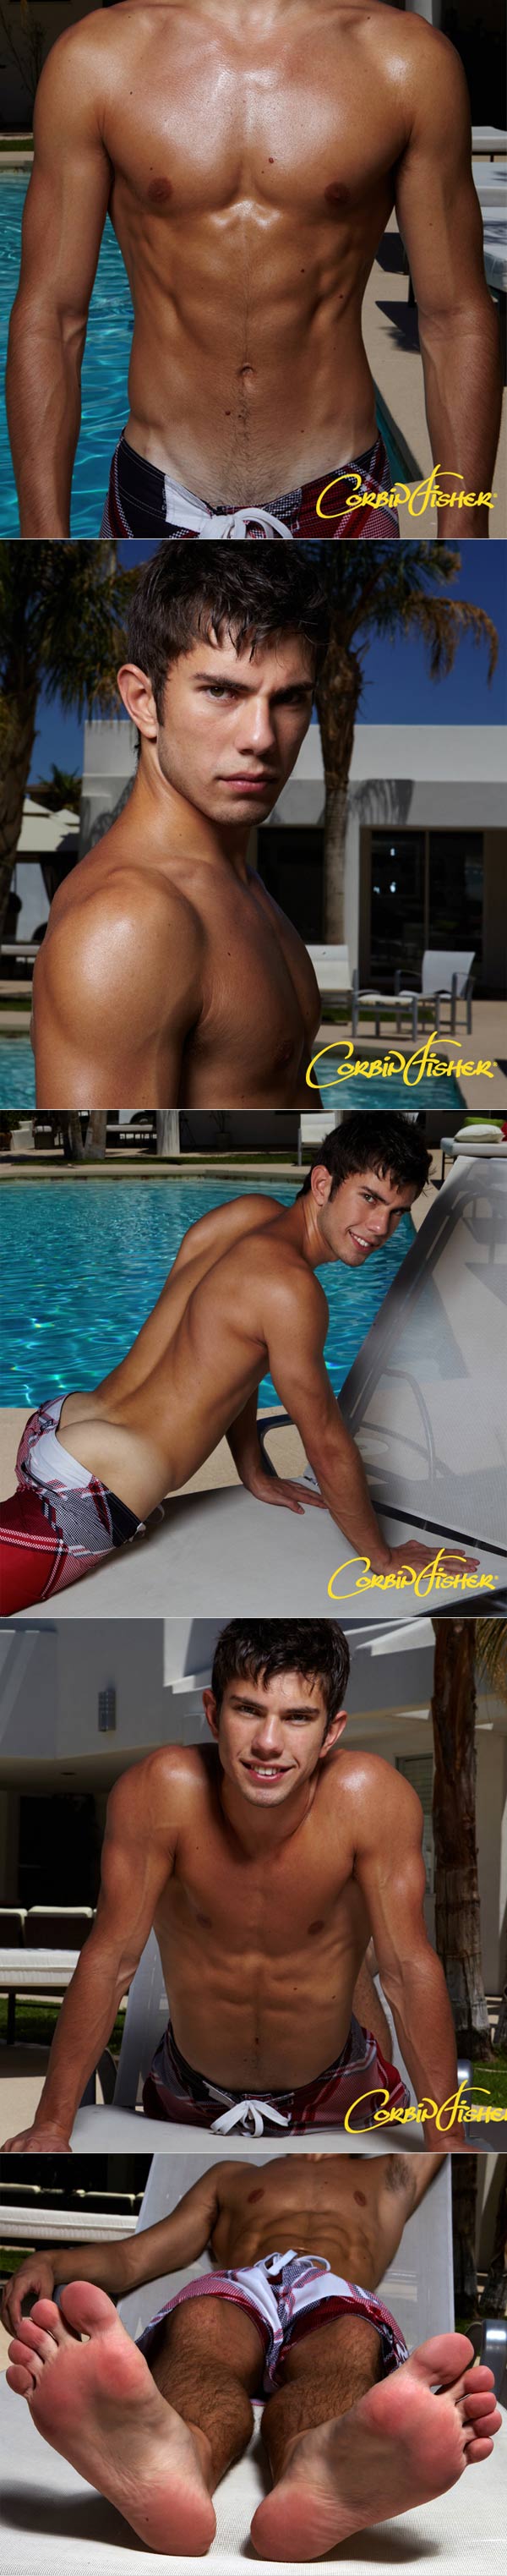 Robbie (Scores His Goal) at CorbinFisher